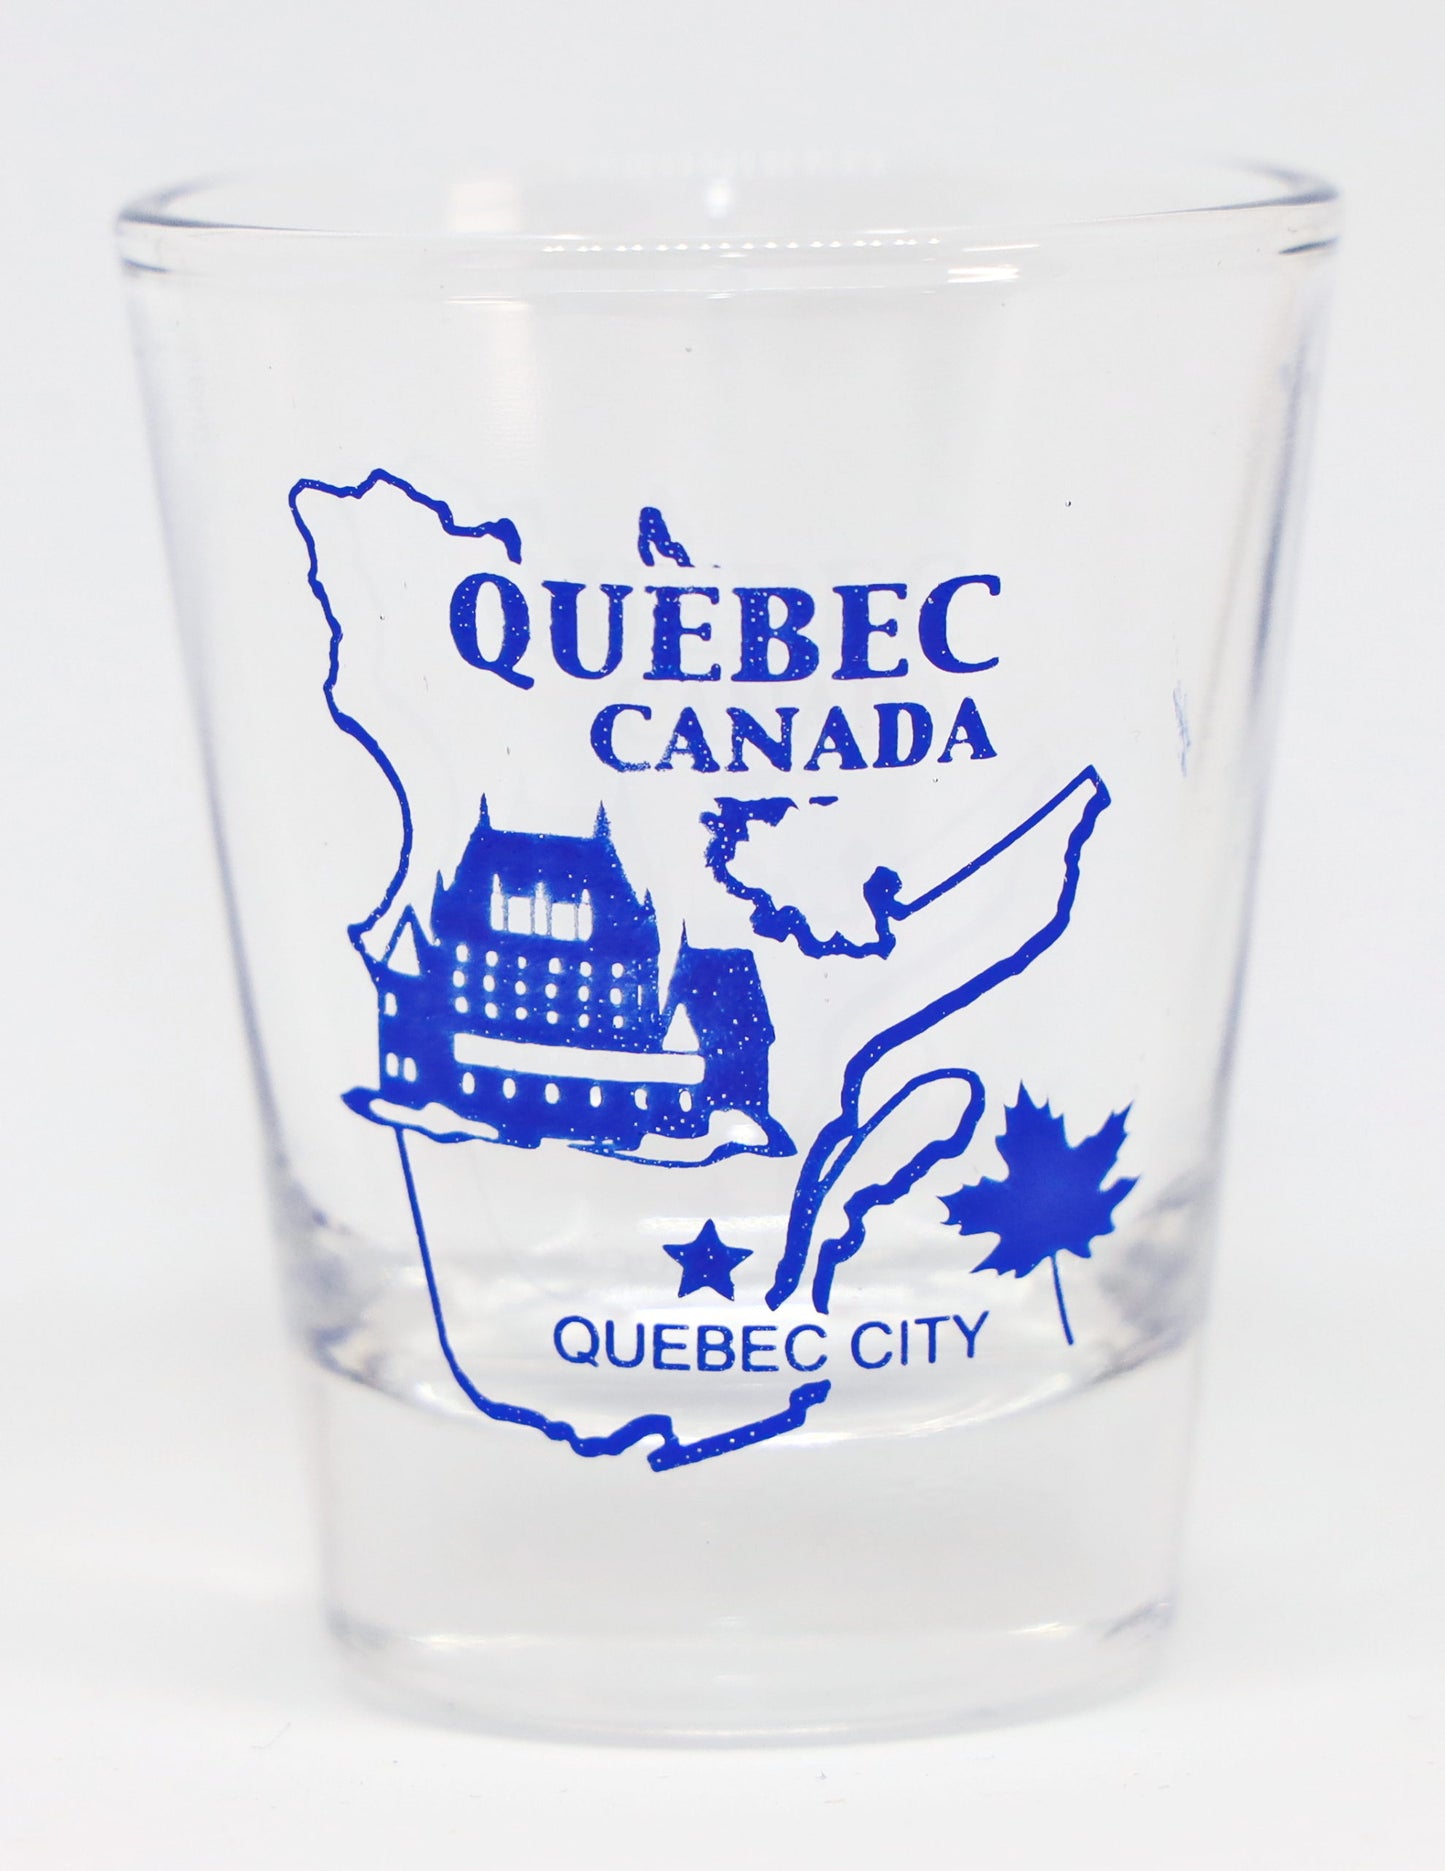 Quebec Canada (11 in Series of 13) Shot Glass. Collect All!